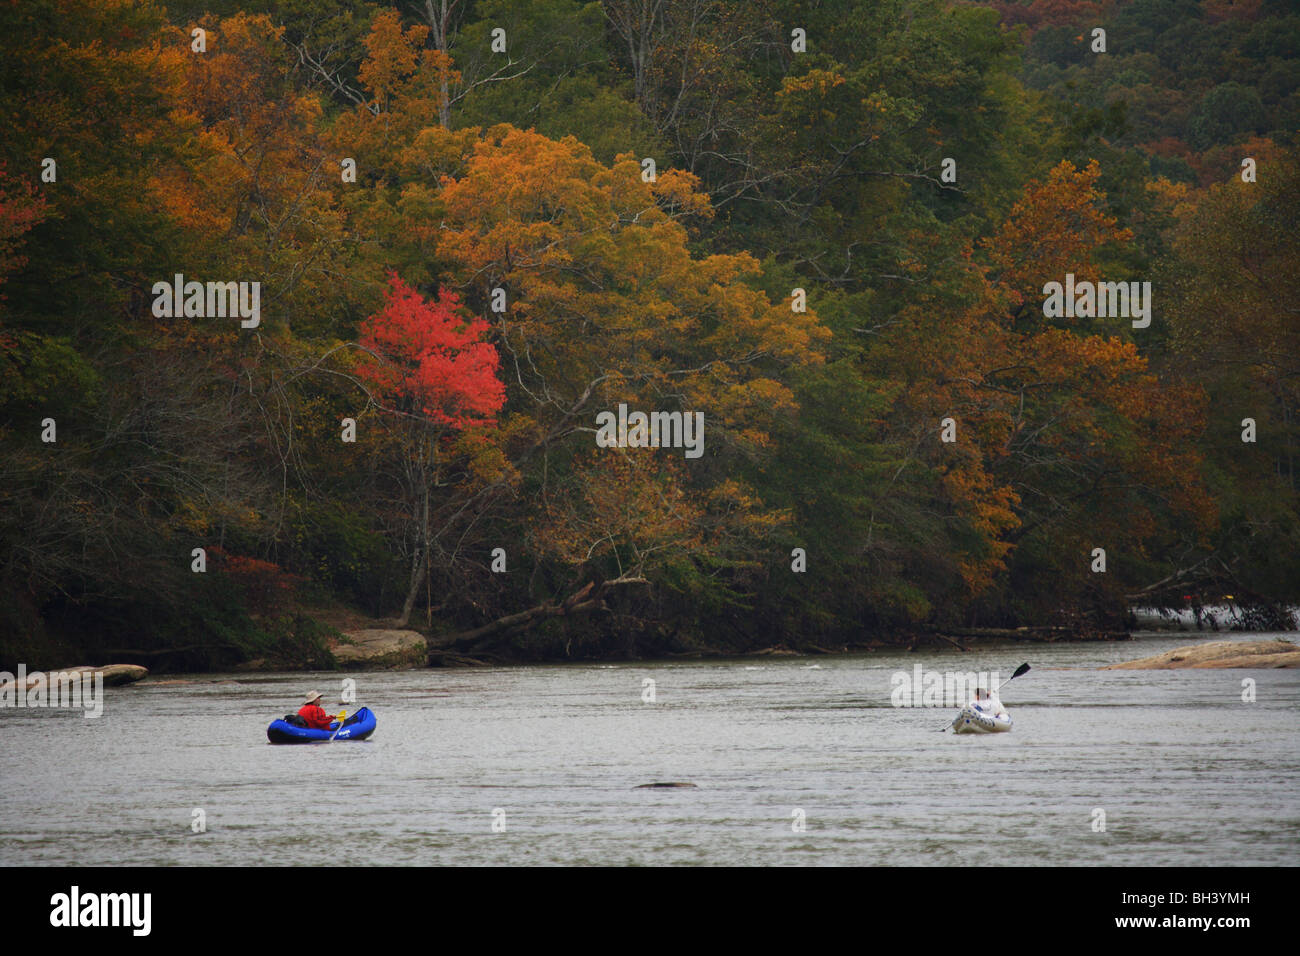 KAYAKER(S) INFLATABLE KAYAKS PADDLING A RIVER ENJOYING THE FALL COLOR IN THE TREES GEORGIA WIDE ANGLE NO MODEL RELEASE Stock Photo